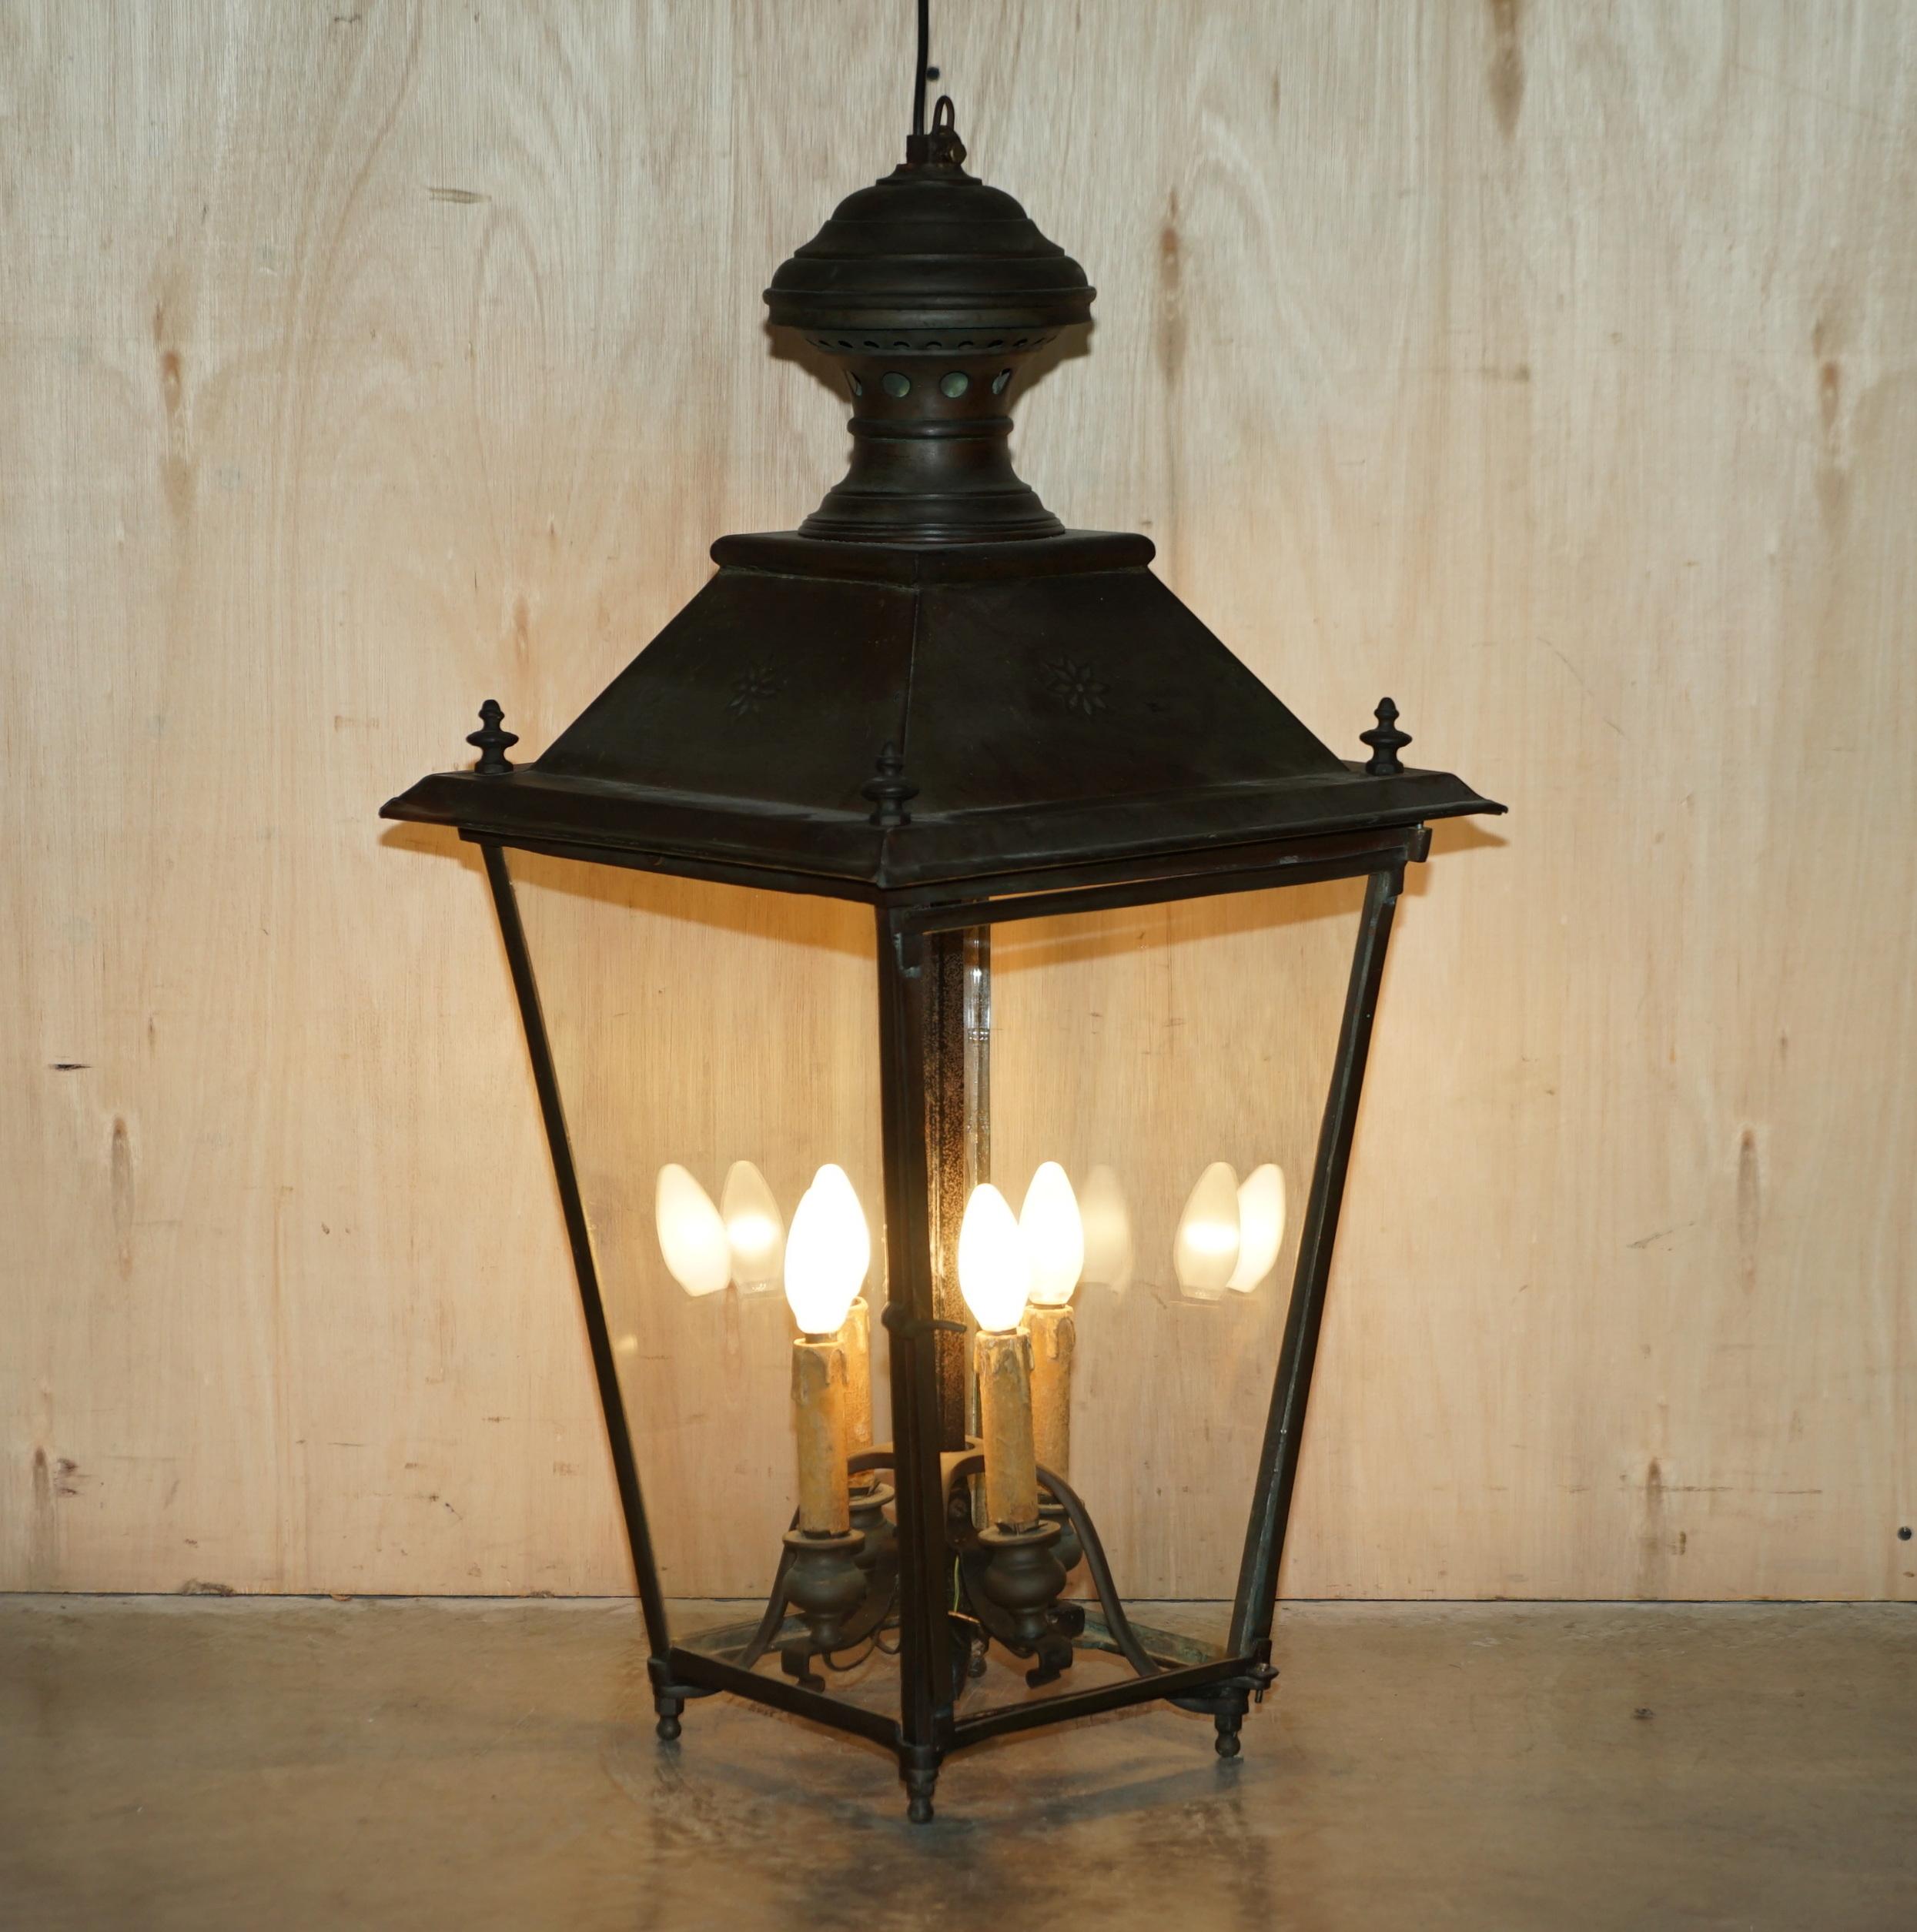 We are delighted to offer for sale this lovely Antique Victorian circa 1880 bronze hanging lantern with four candle base
A good looking well made and desirable pendant lantern in lovely period condition 

This piece is full of charm and character